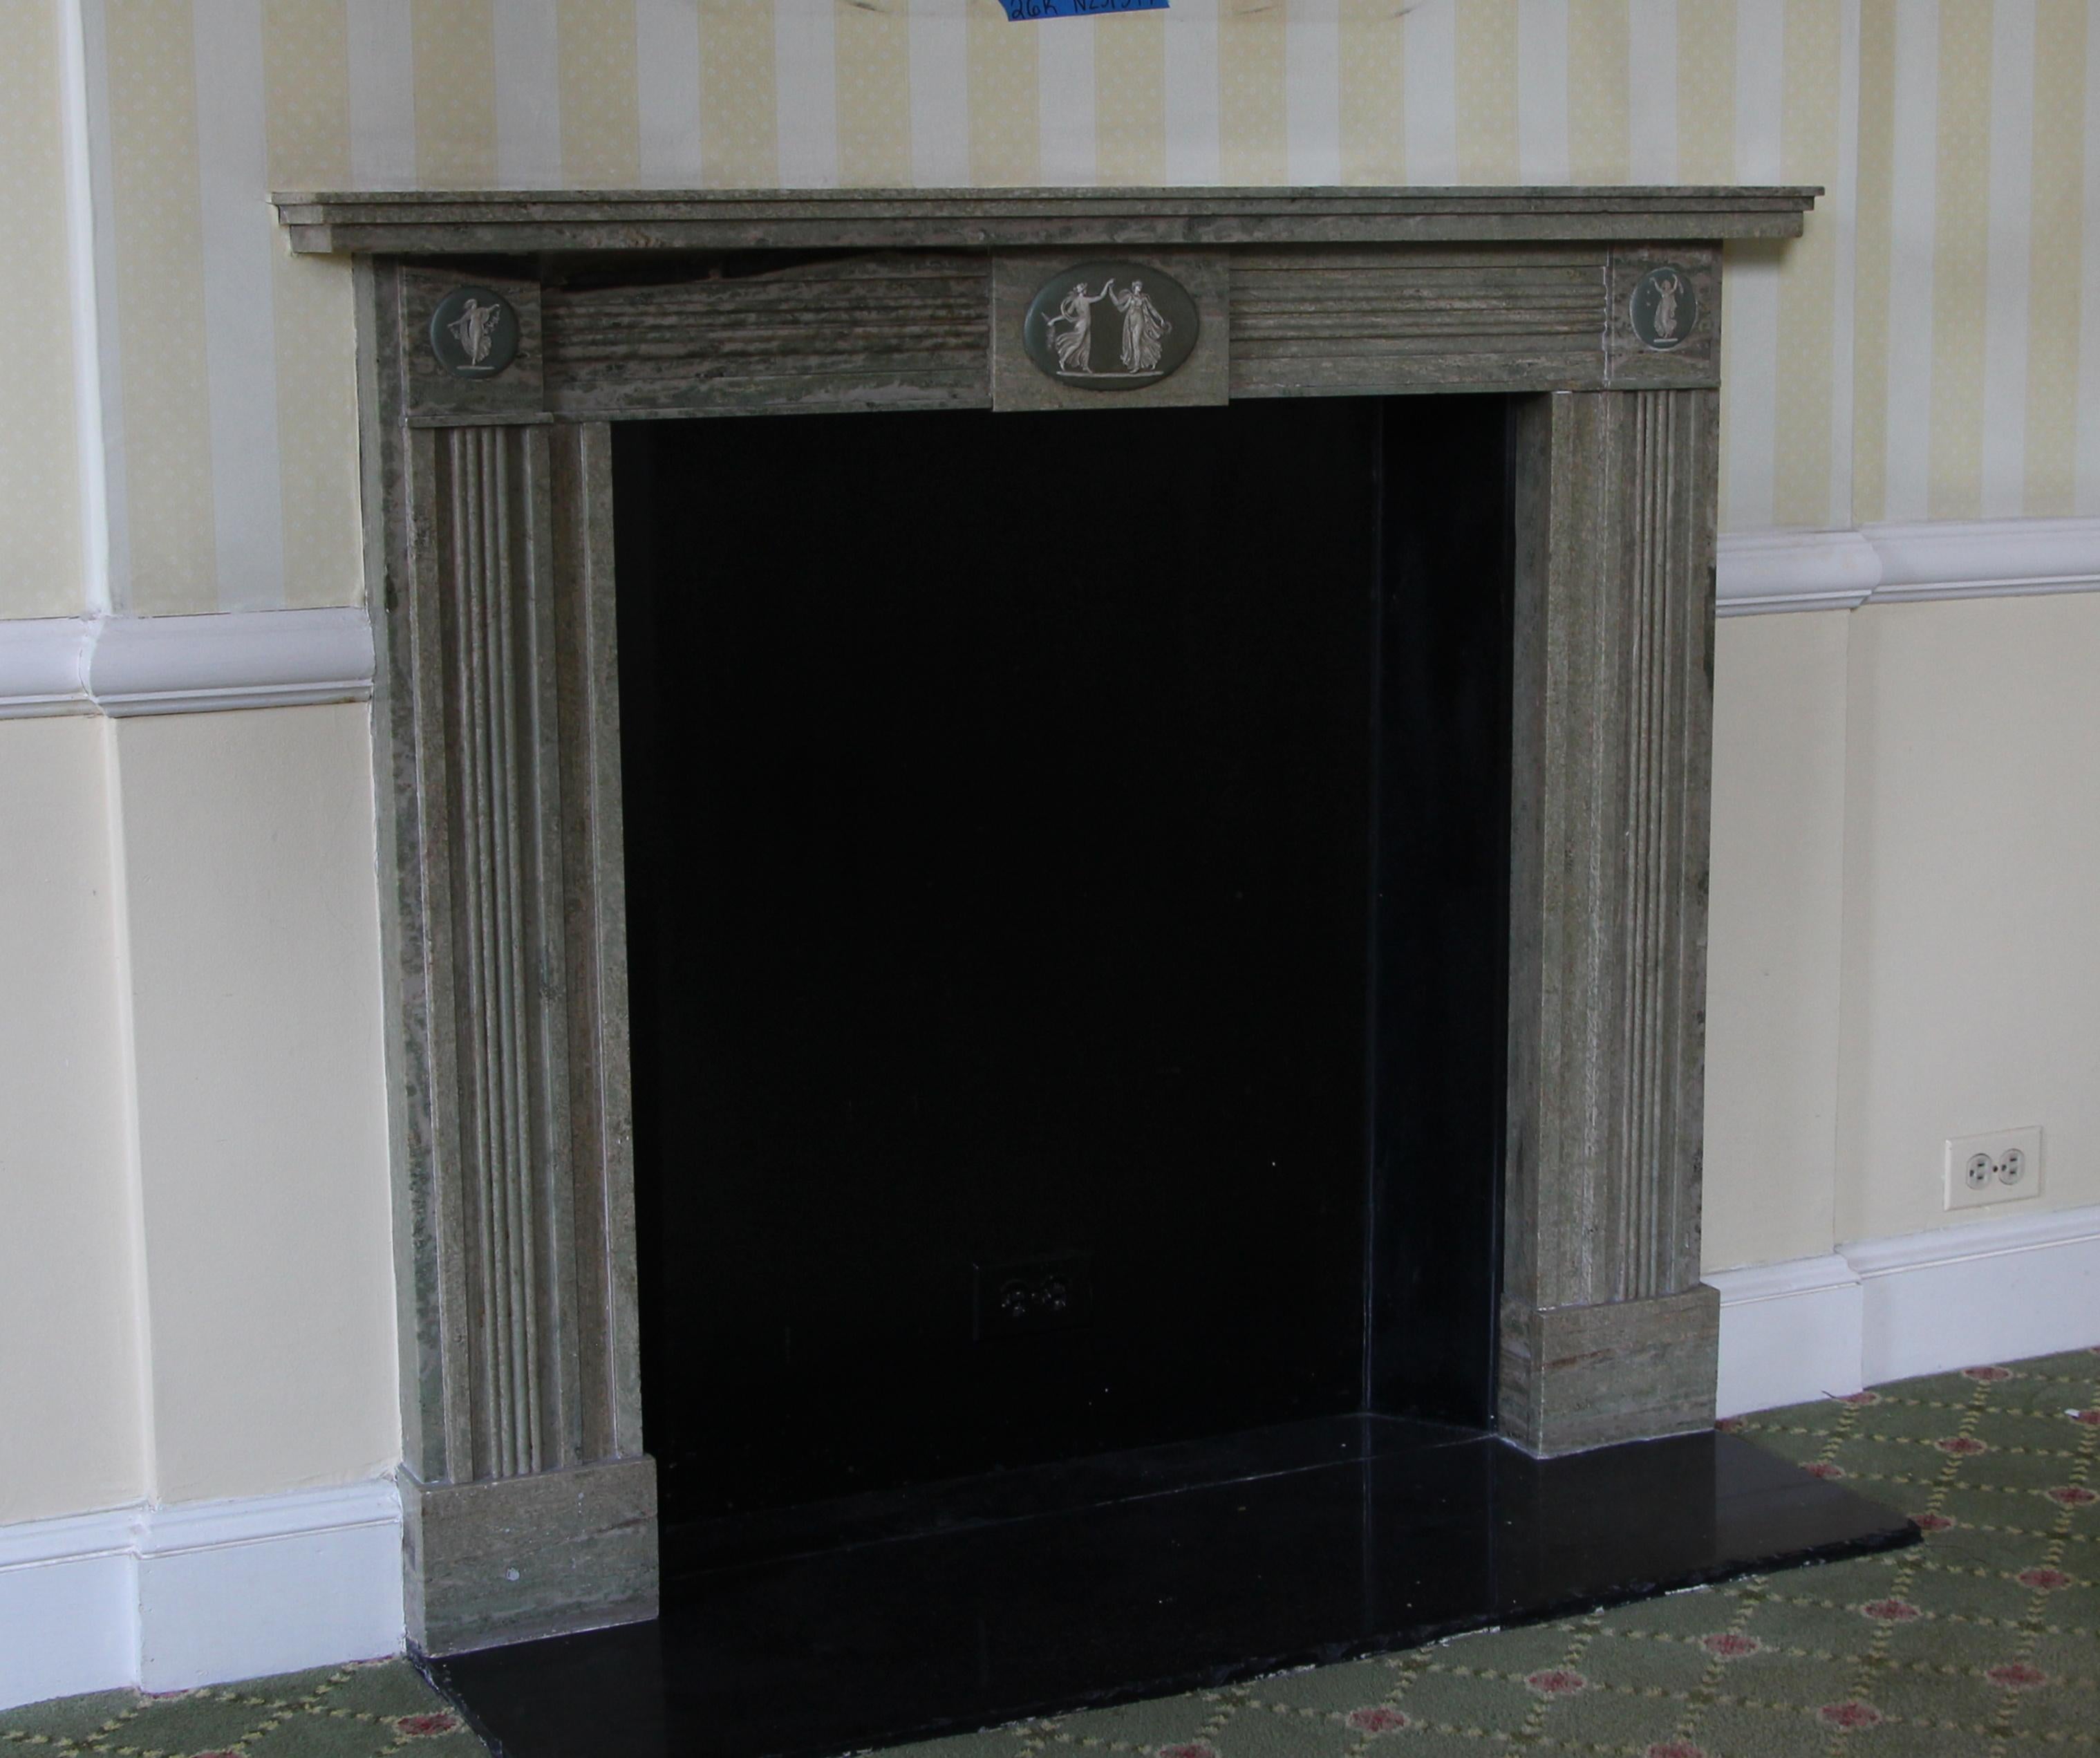 Hearth not included. 19th century petite English Regency style gray marble mantel with carved figural motifs on the two top plinths and the middle of the header and gray veining. Fluted carving on breast plate and pilasters on sides. This mantel was